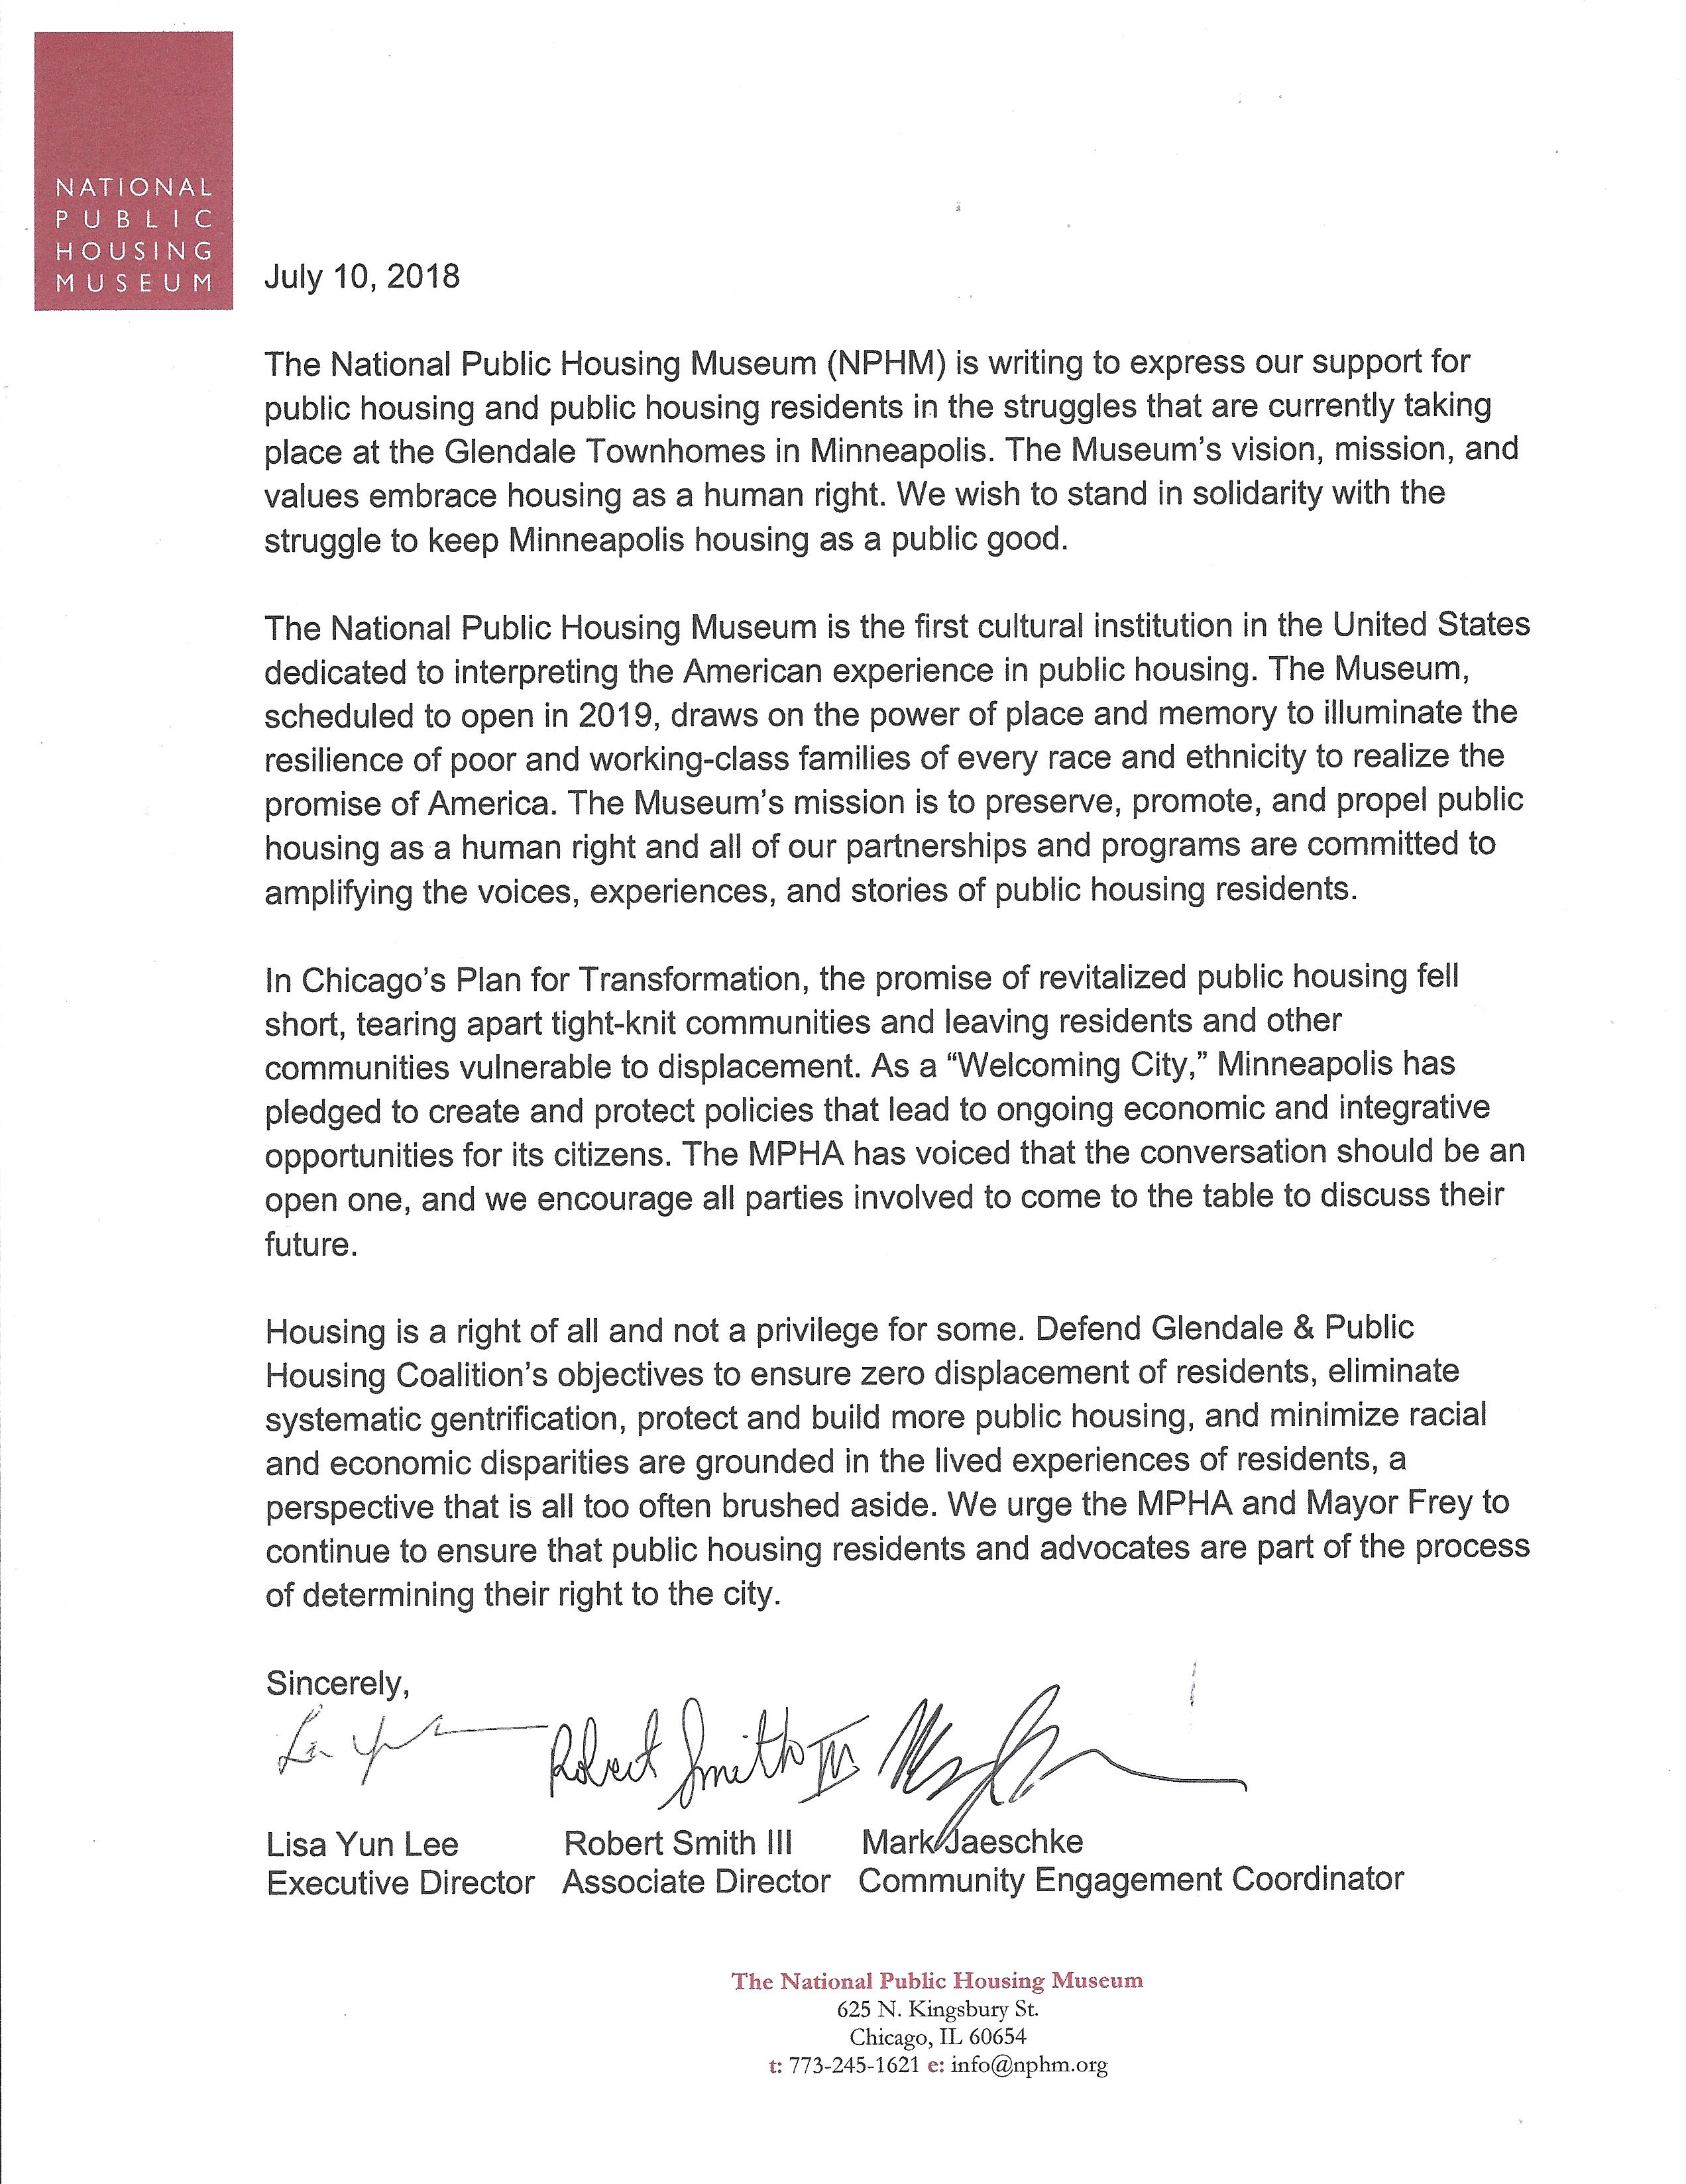 A Letter of Support from The National Public Housing Museum – Defend  Glendale & Public Housing Coalition